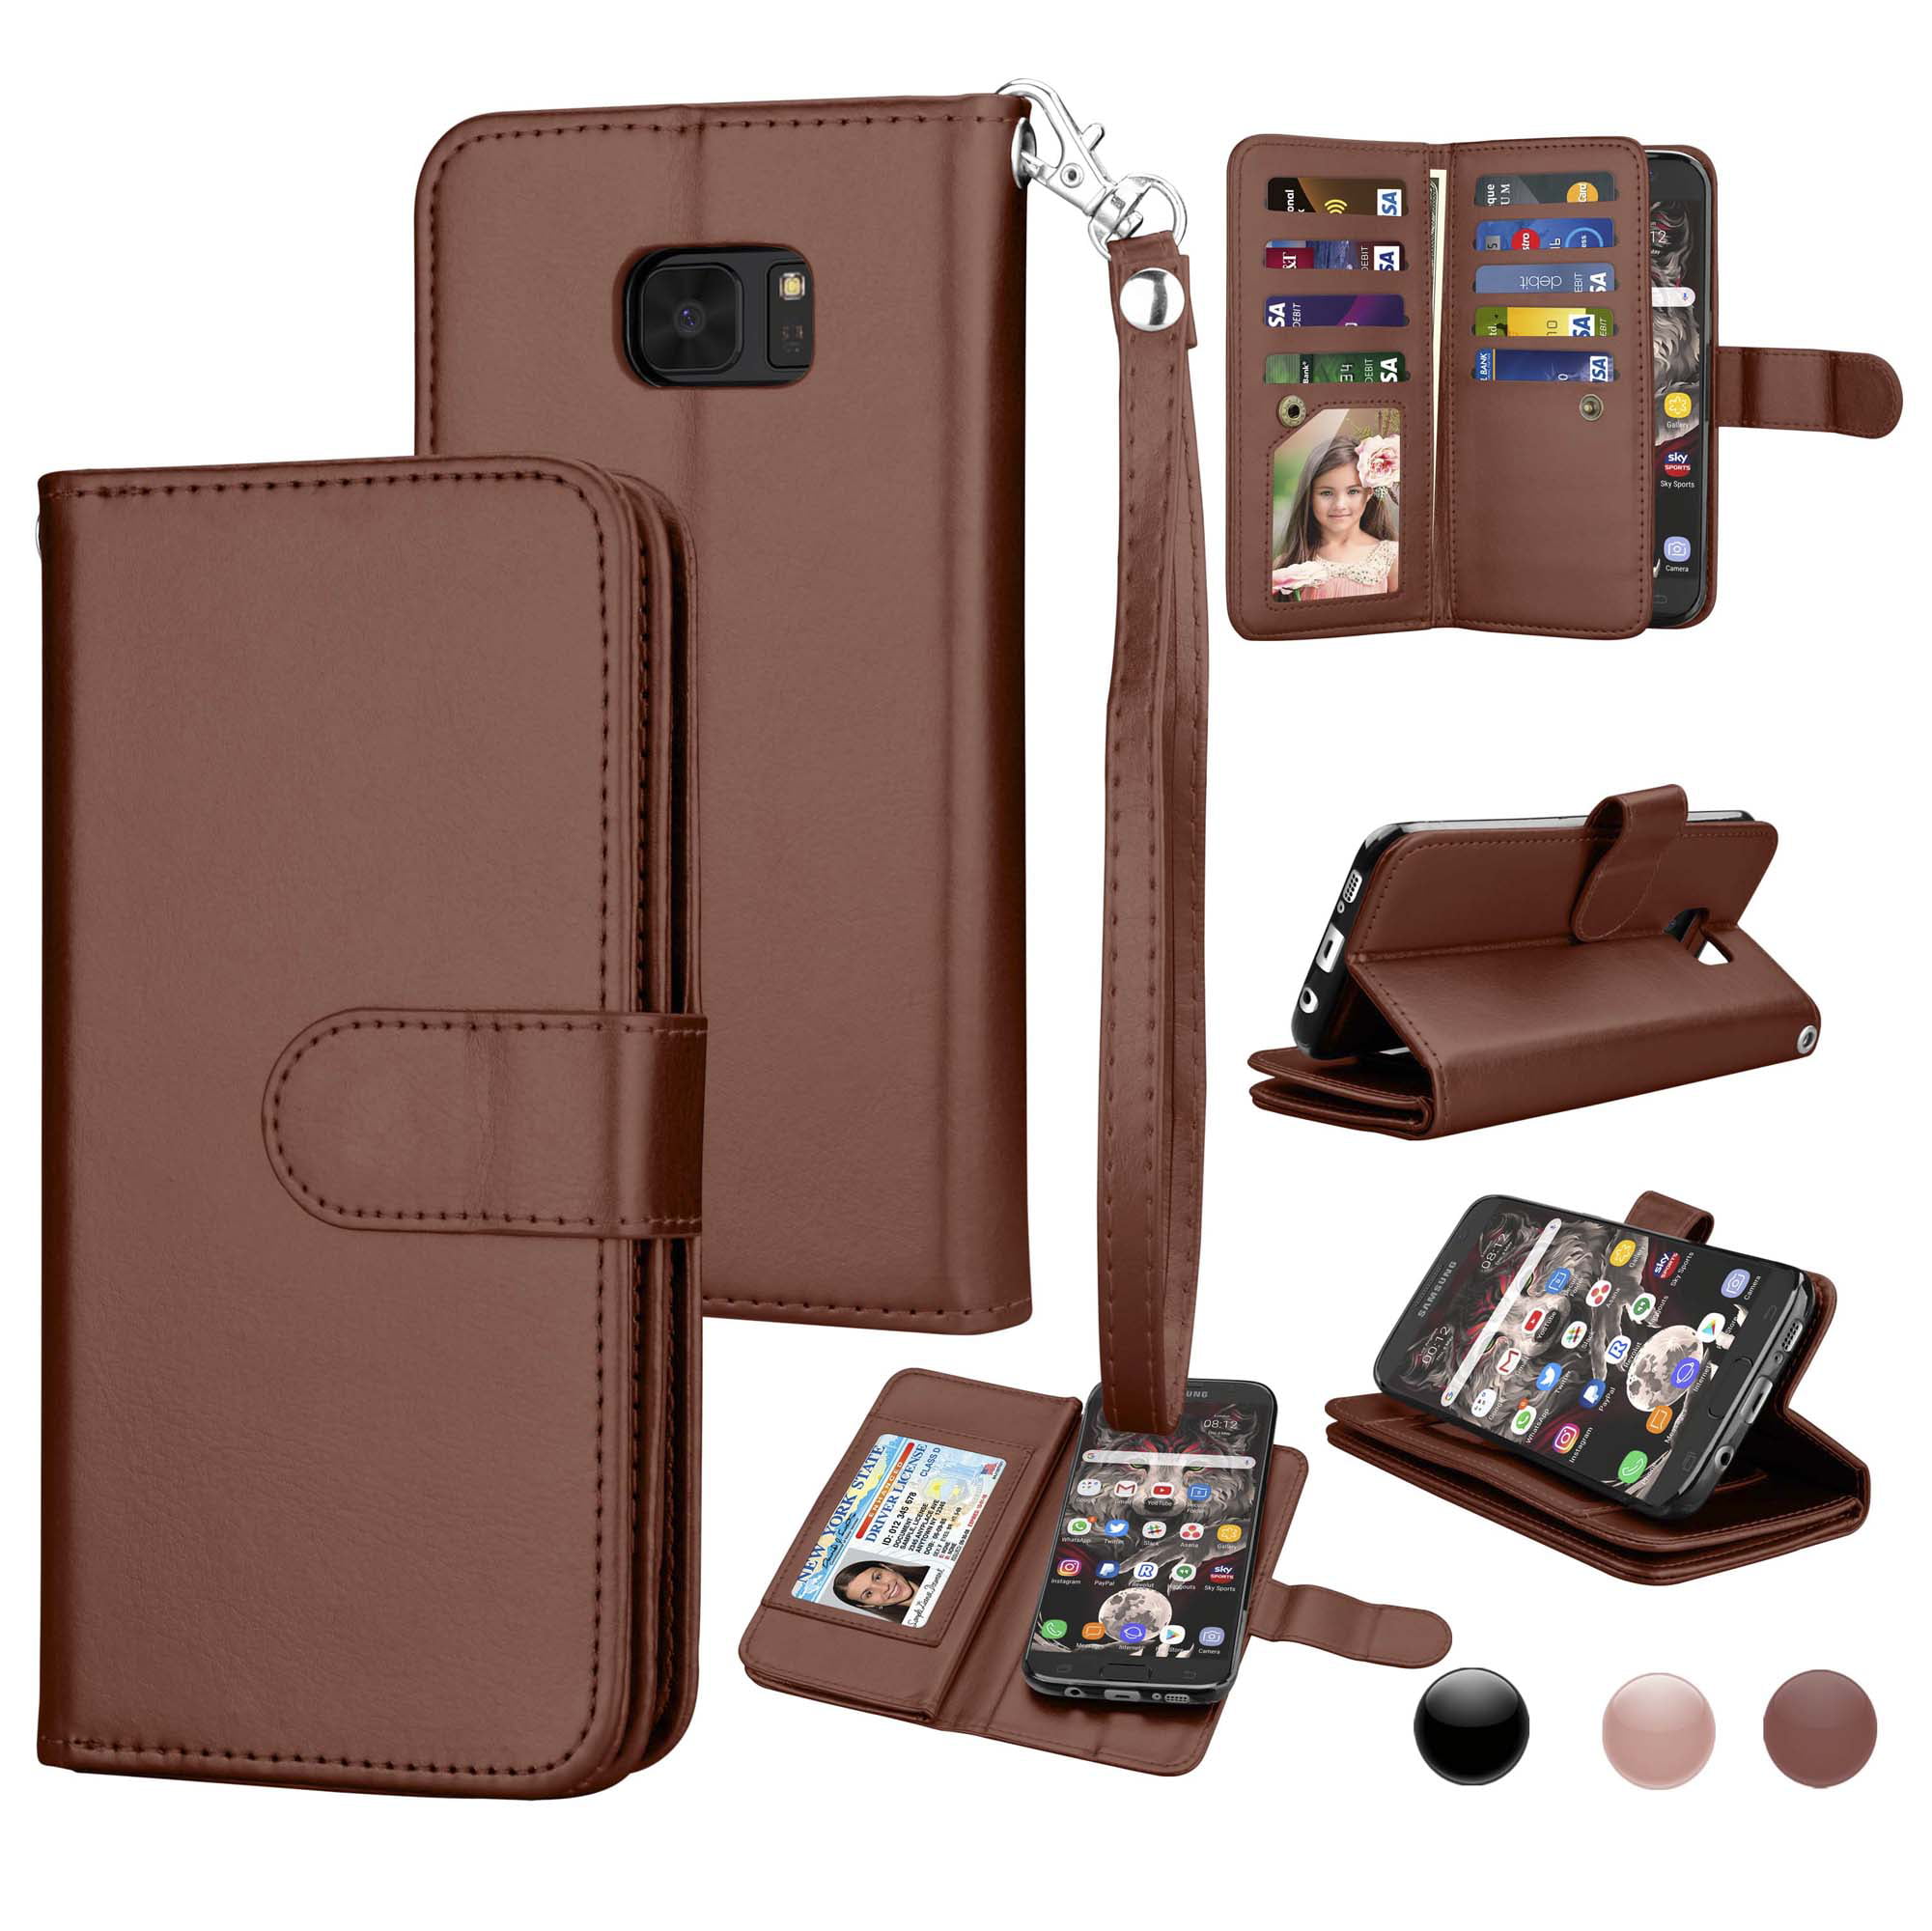 Leather Dual Wallet Folio TPU Cover 2 Large Pockets Double flap Privacy Multi Card Slots Snap Button Strap For Samsung Galaxy S7 Active G891 Dark Brown NEXTKIN Galaxy S7 Active Case